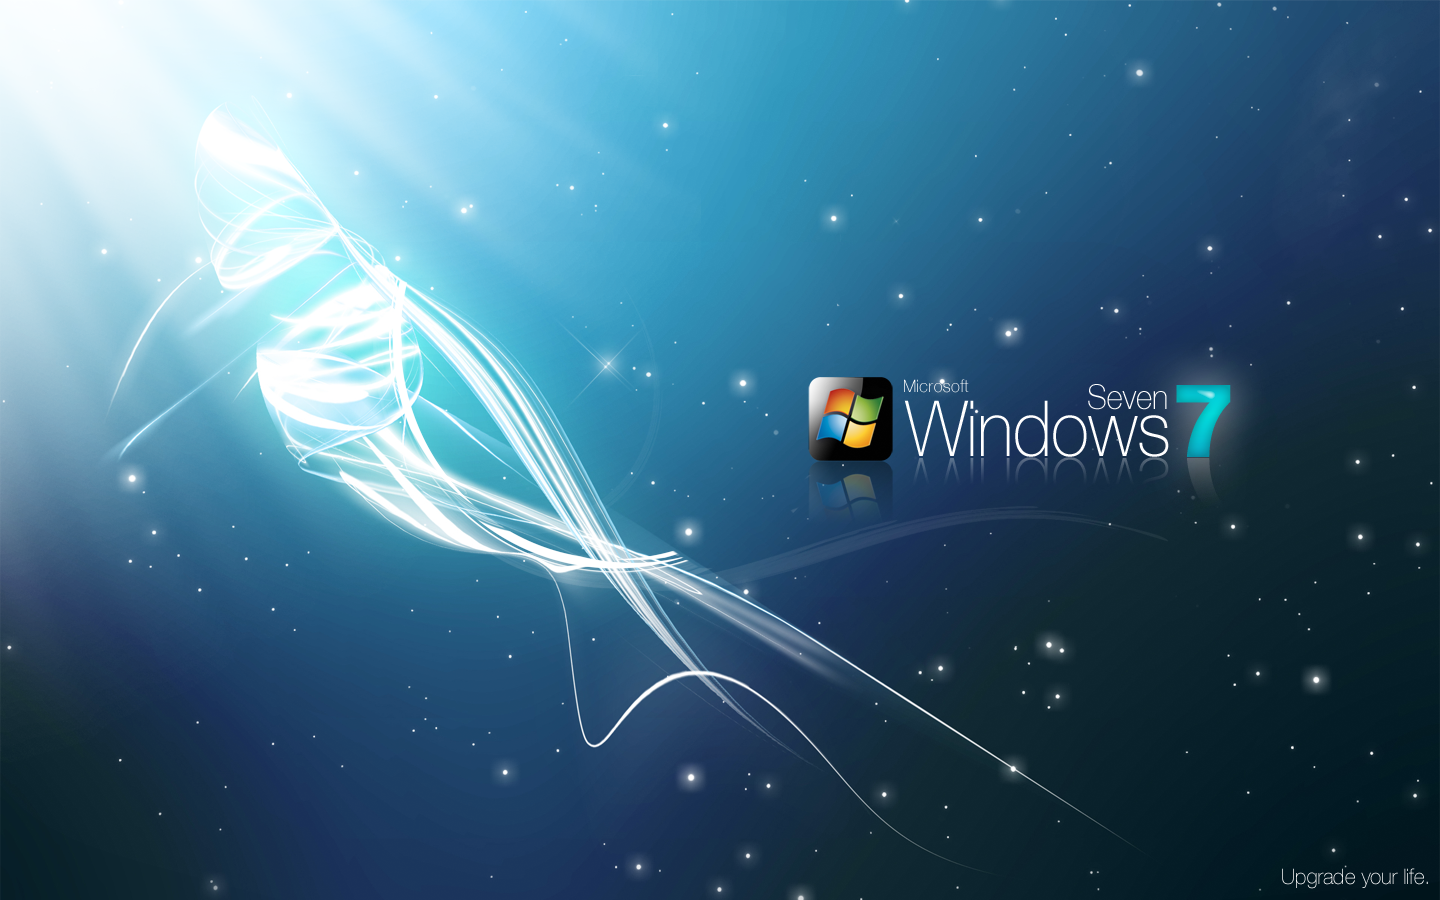 ... Windows 7 Wallpapers, Backgrounds, Photos, Images andPictures for free